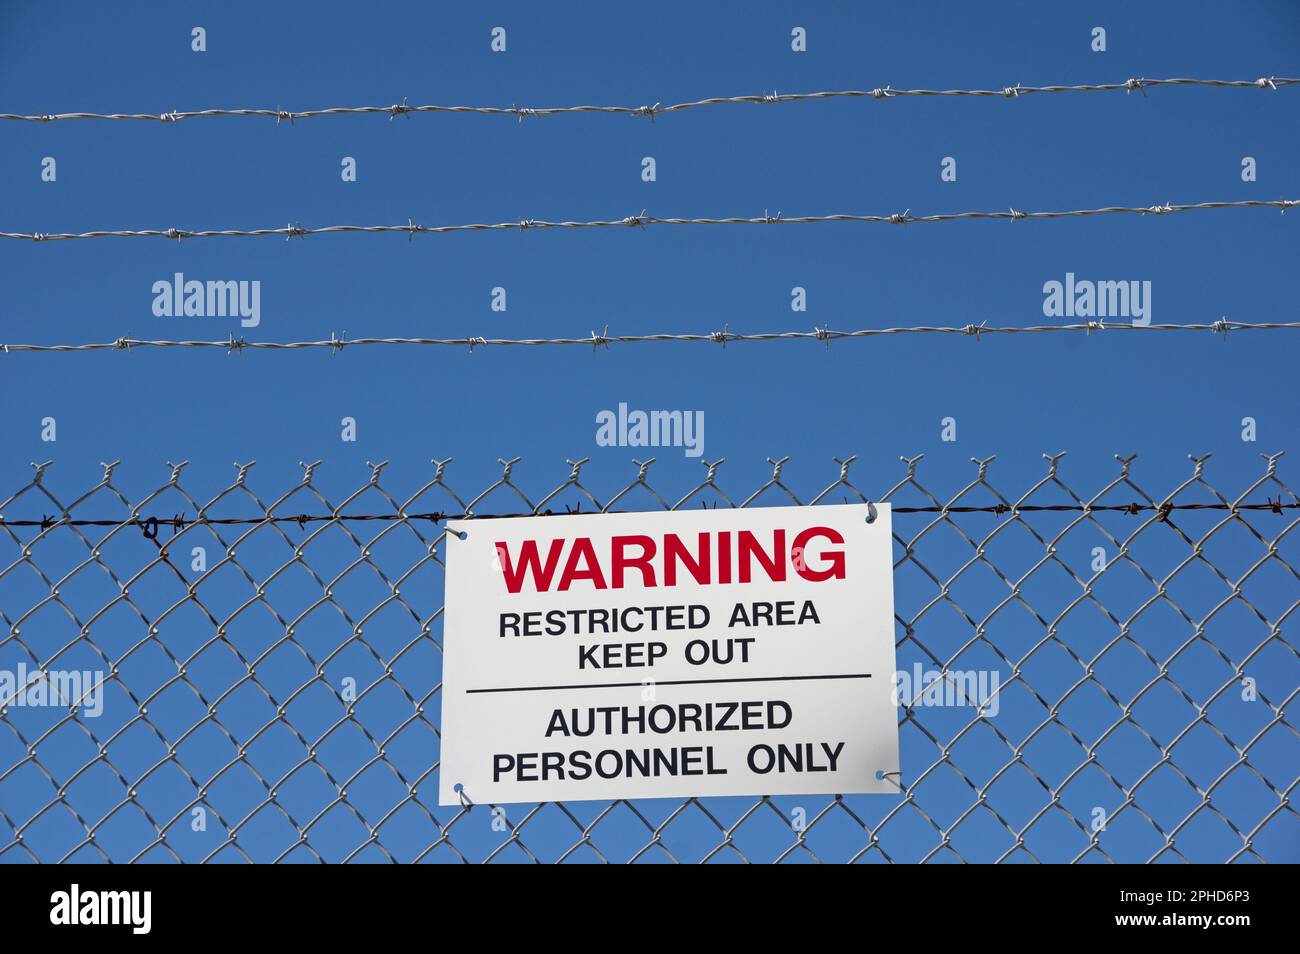 warning restricted area keep out authorized personnel only sign on a barbed wire chain link fence with blue sky background Stock Photo